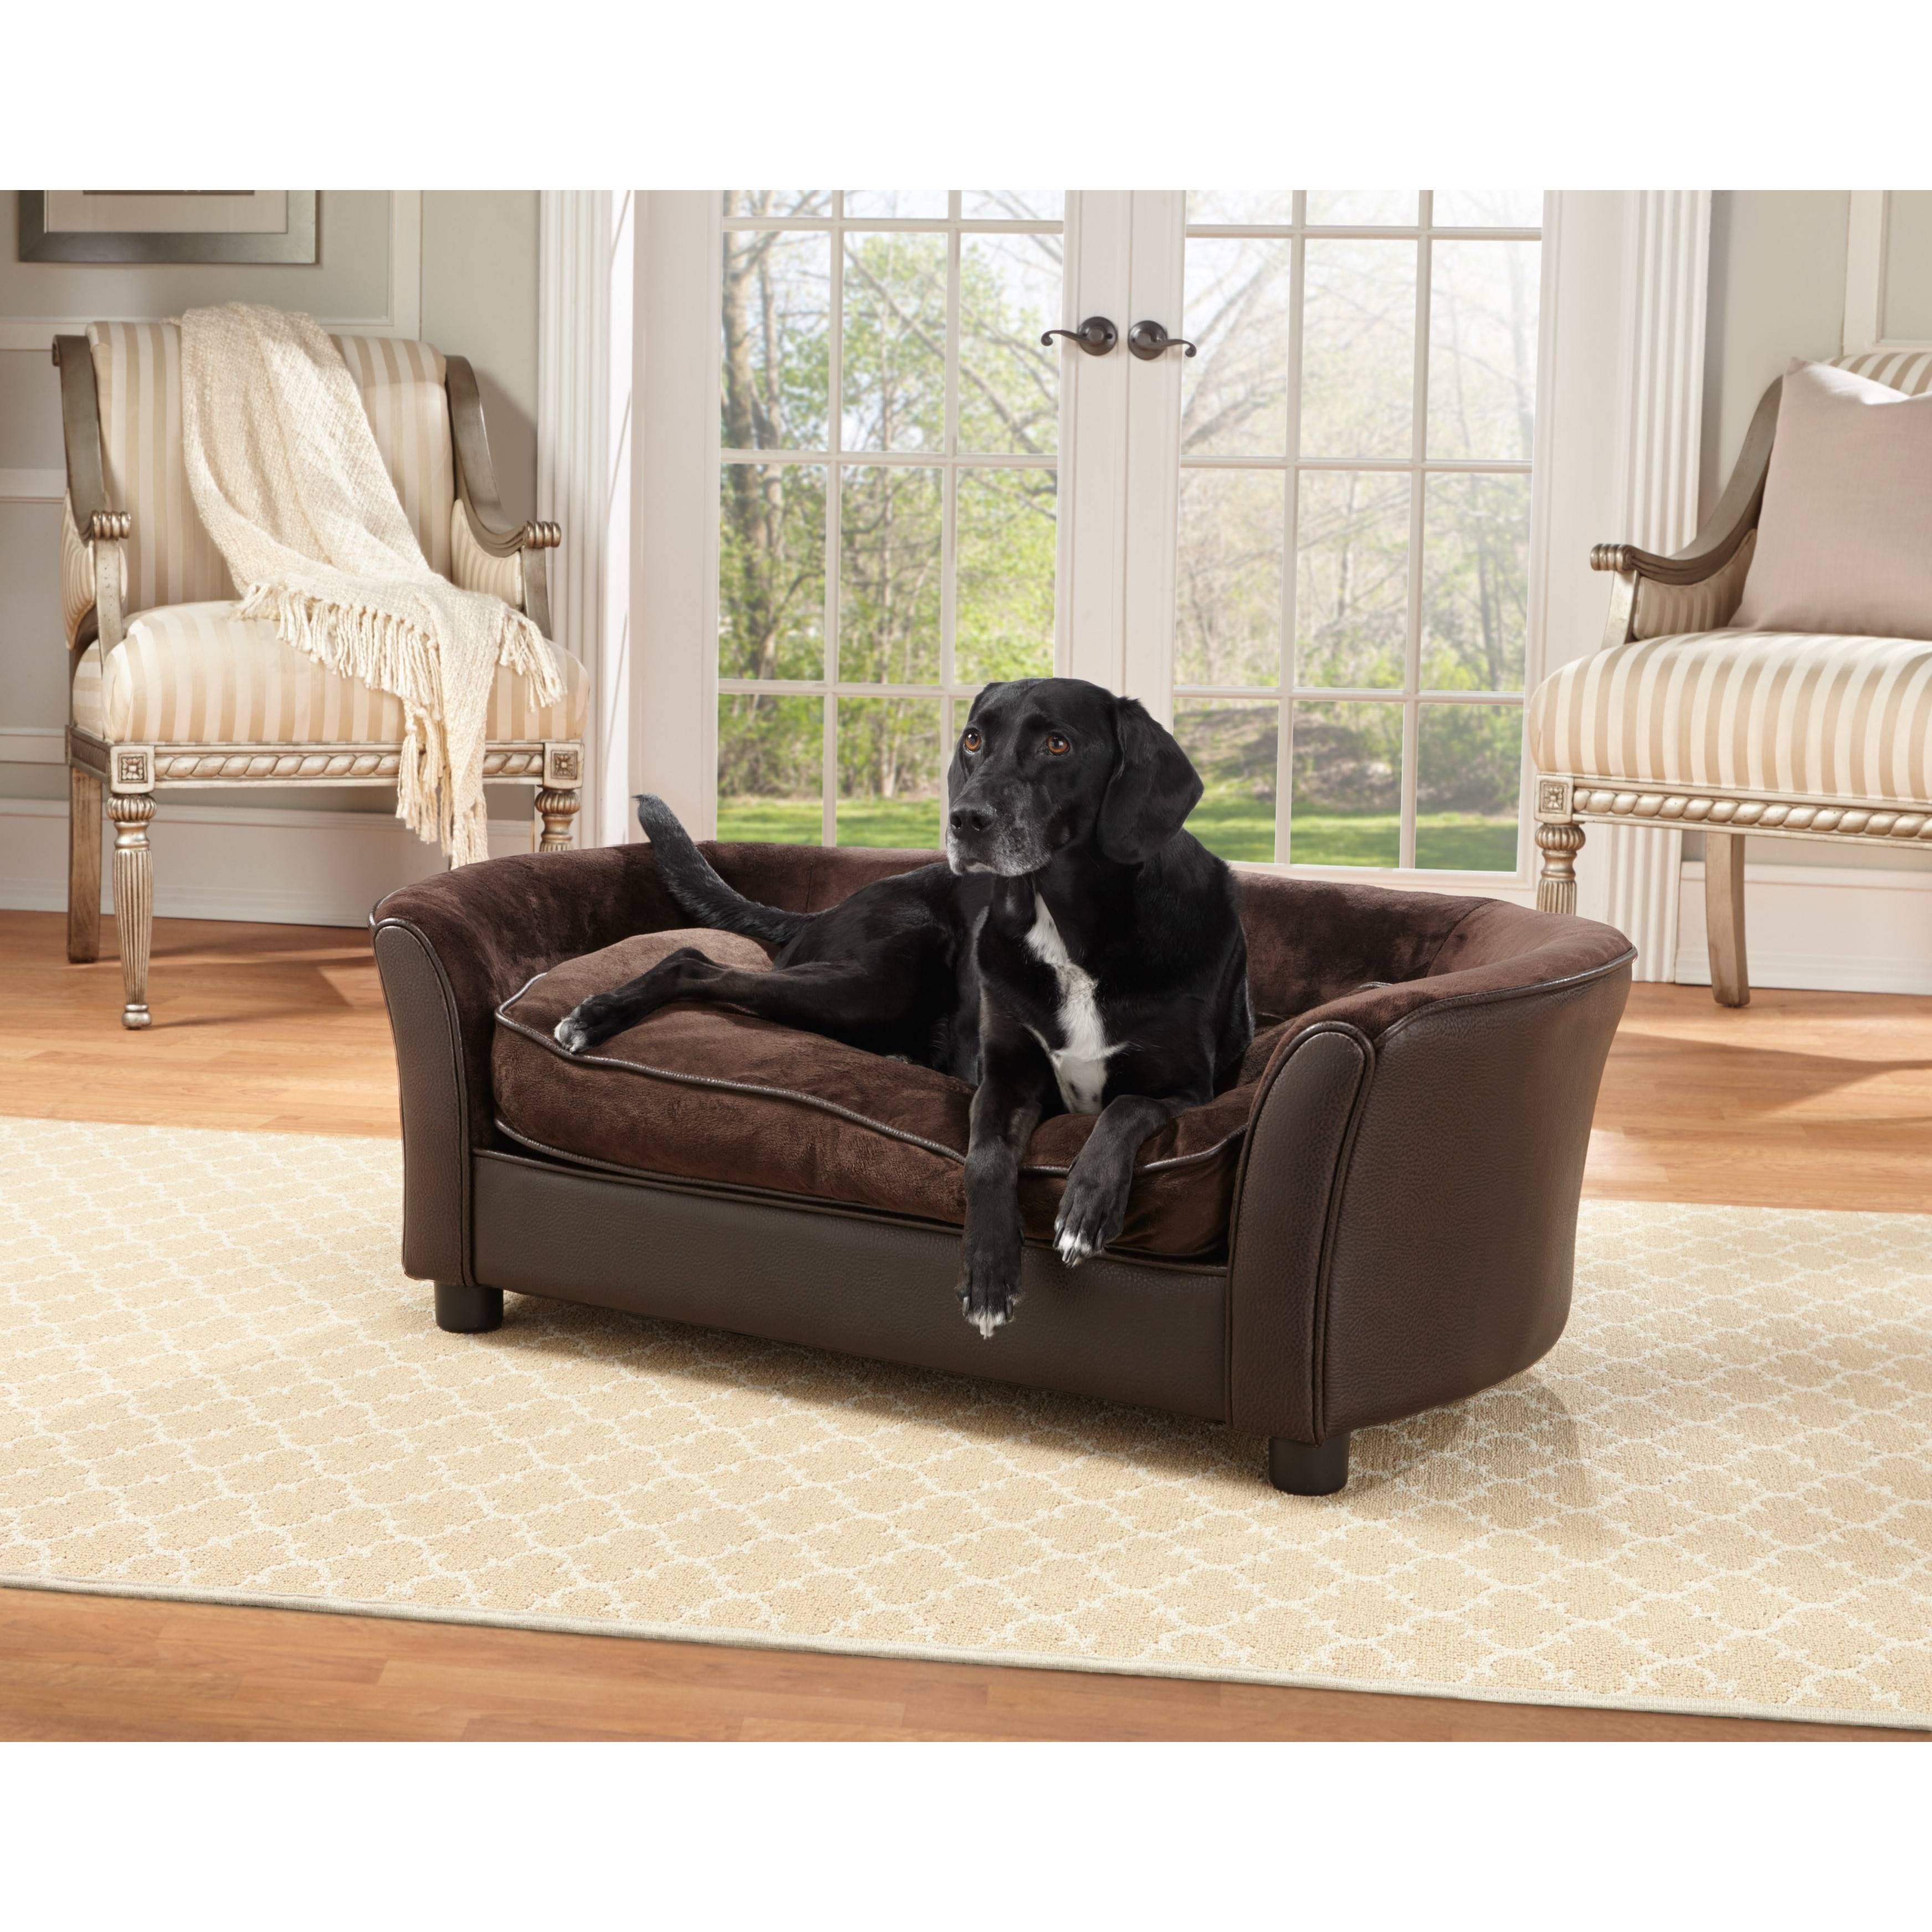 Enchanted Home Pet Brisbane Dog Bed Reviews Wayfair ~ Loversiq With Dog Sofas And Chairs (Photo 15 of 15)